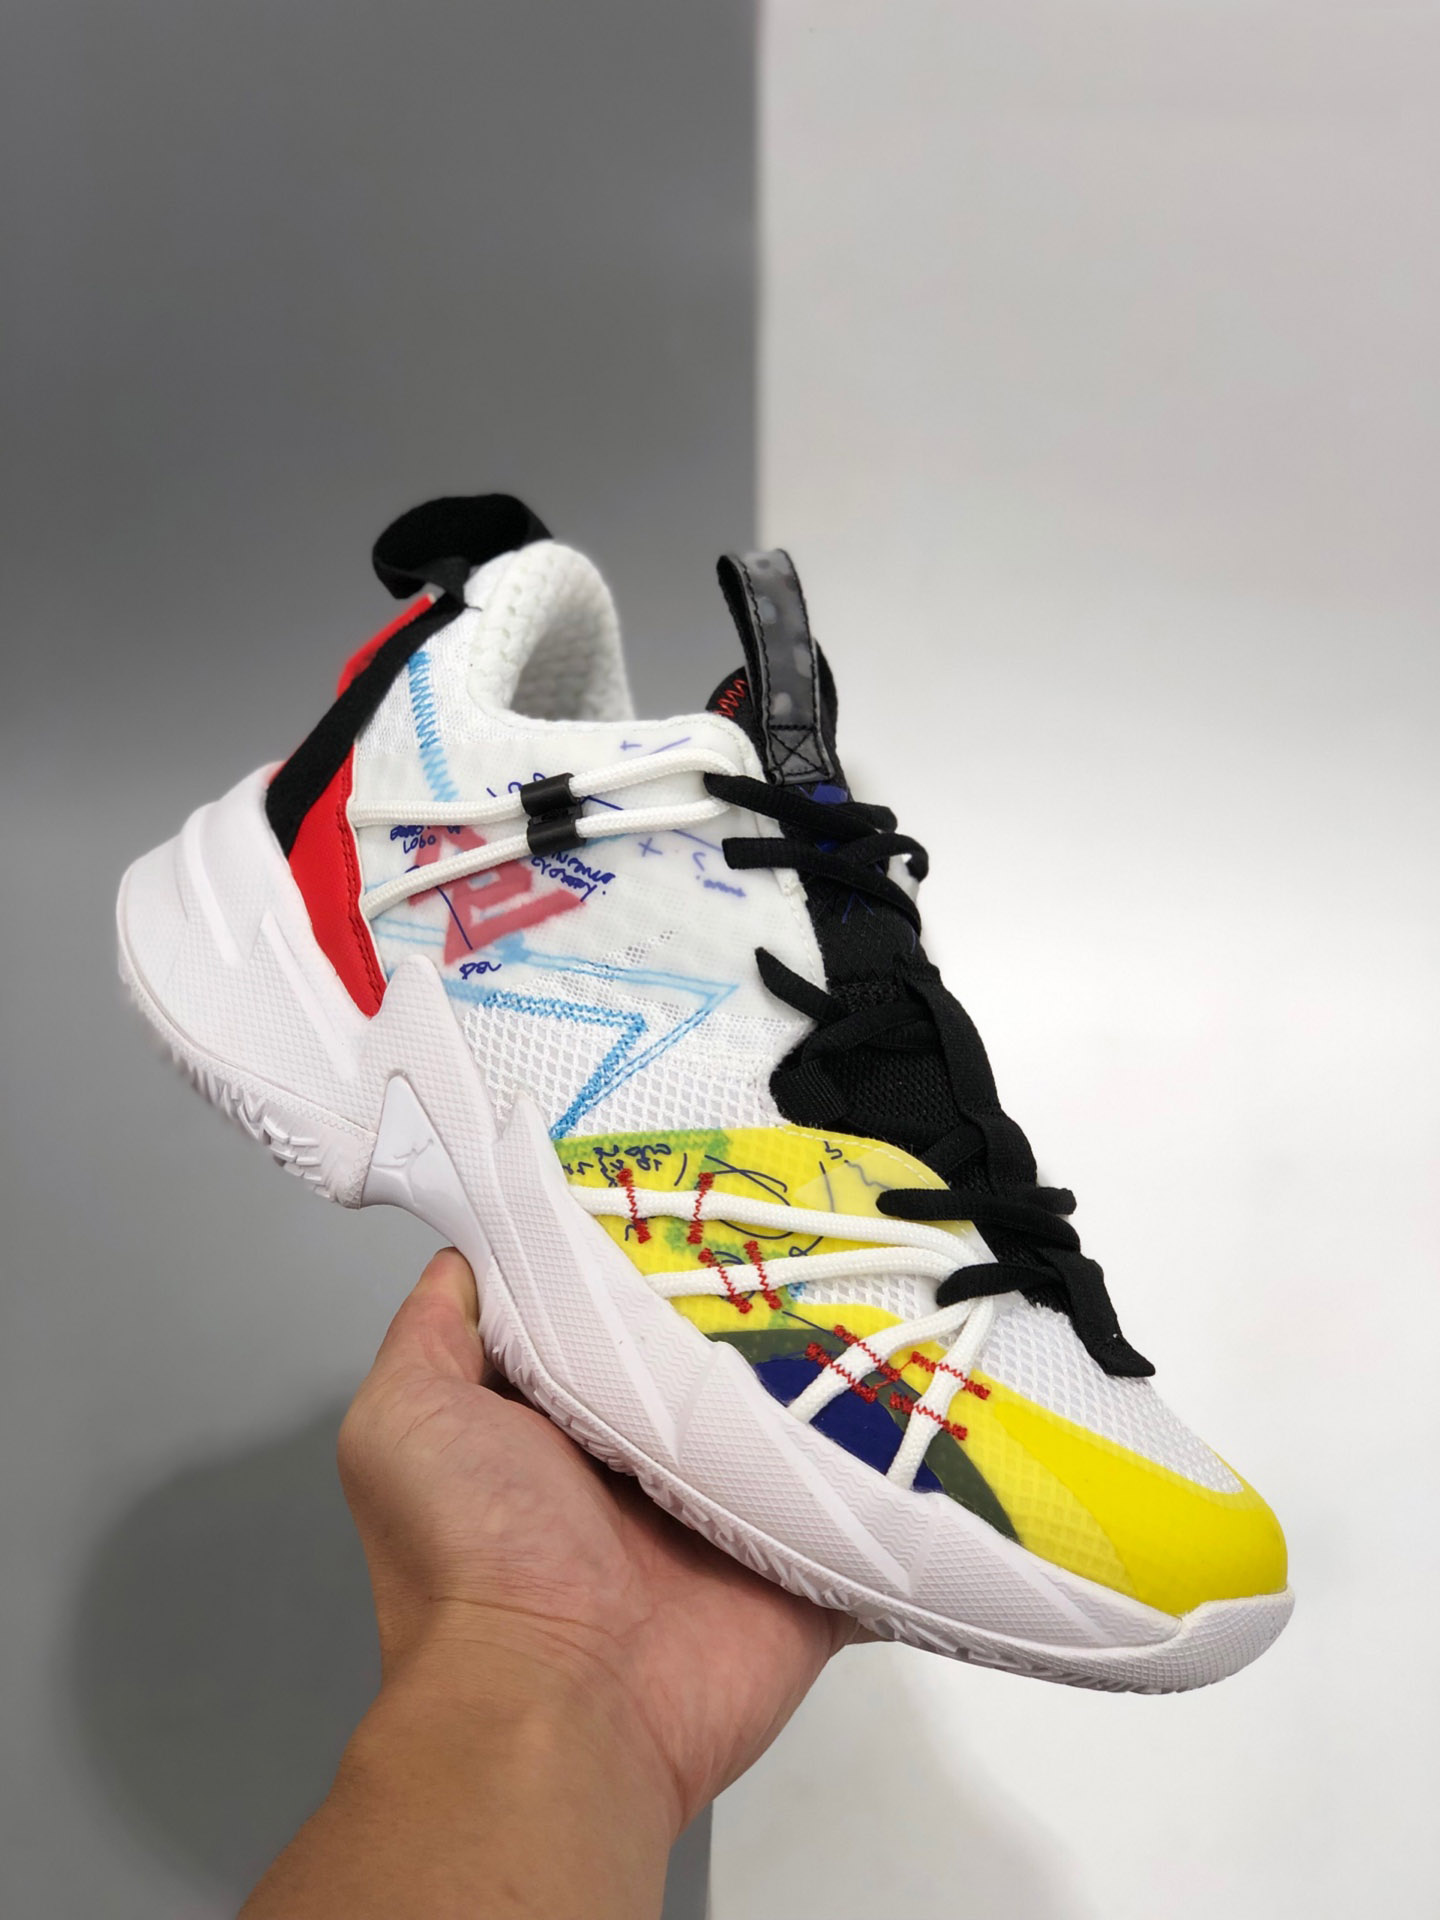 Jordan Why Not Zer0.3 SE "Primary Colors" Shoes